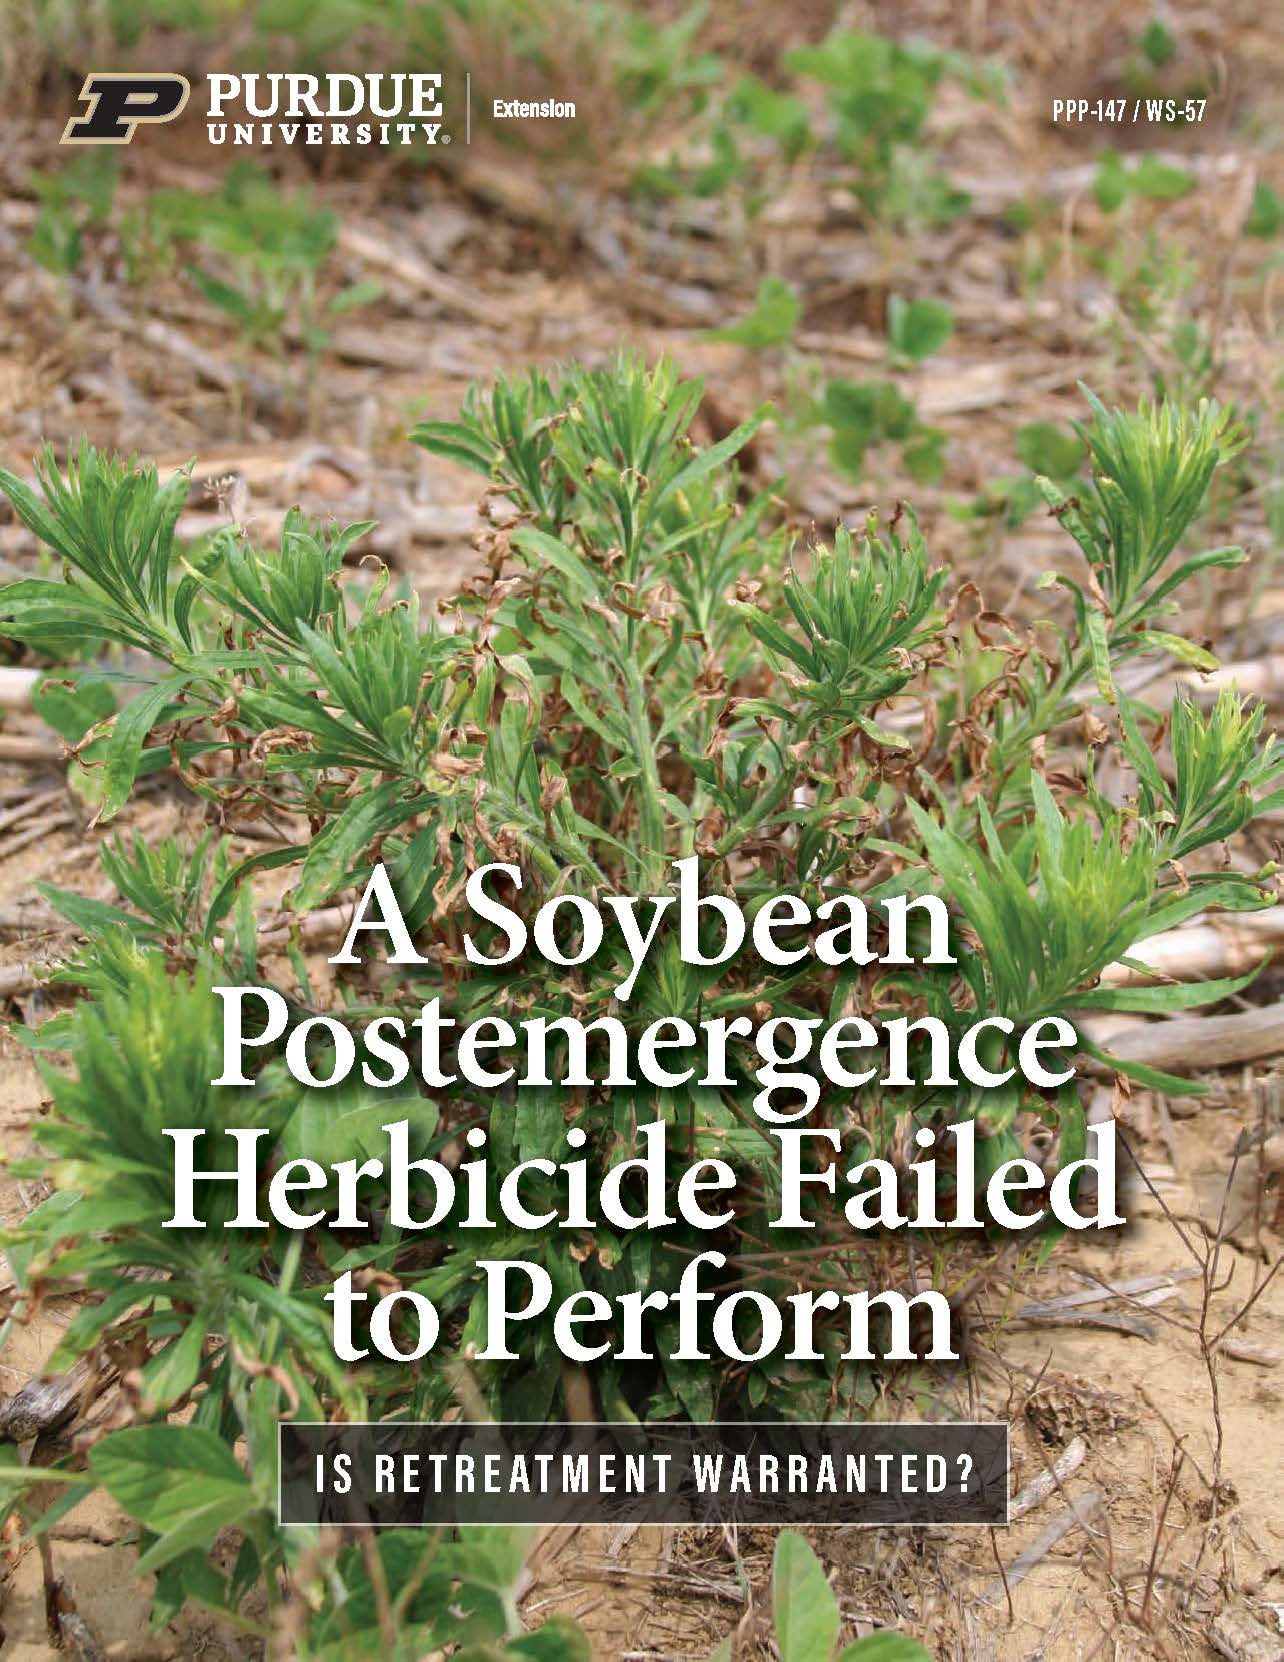 A Soybean Postemergence Herbicide Failed to Perform